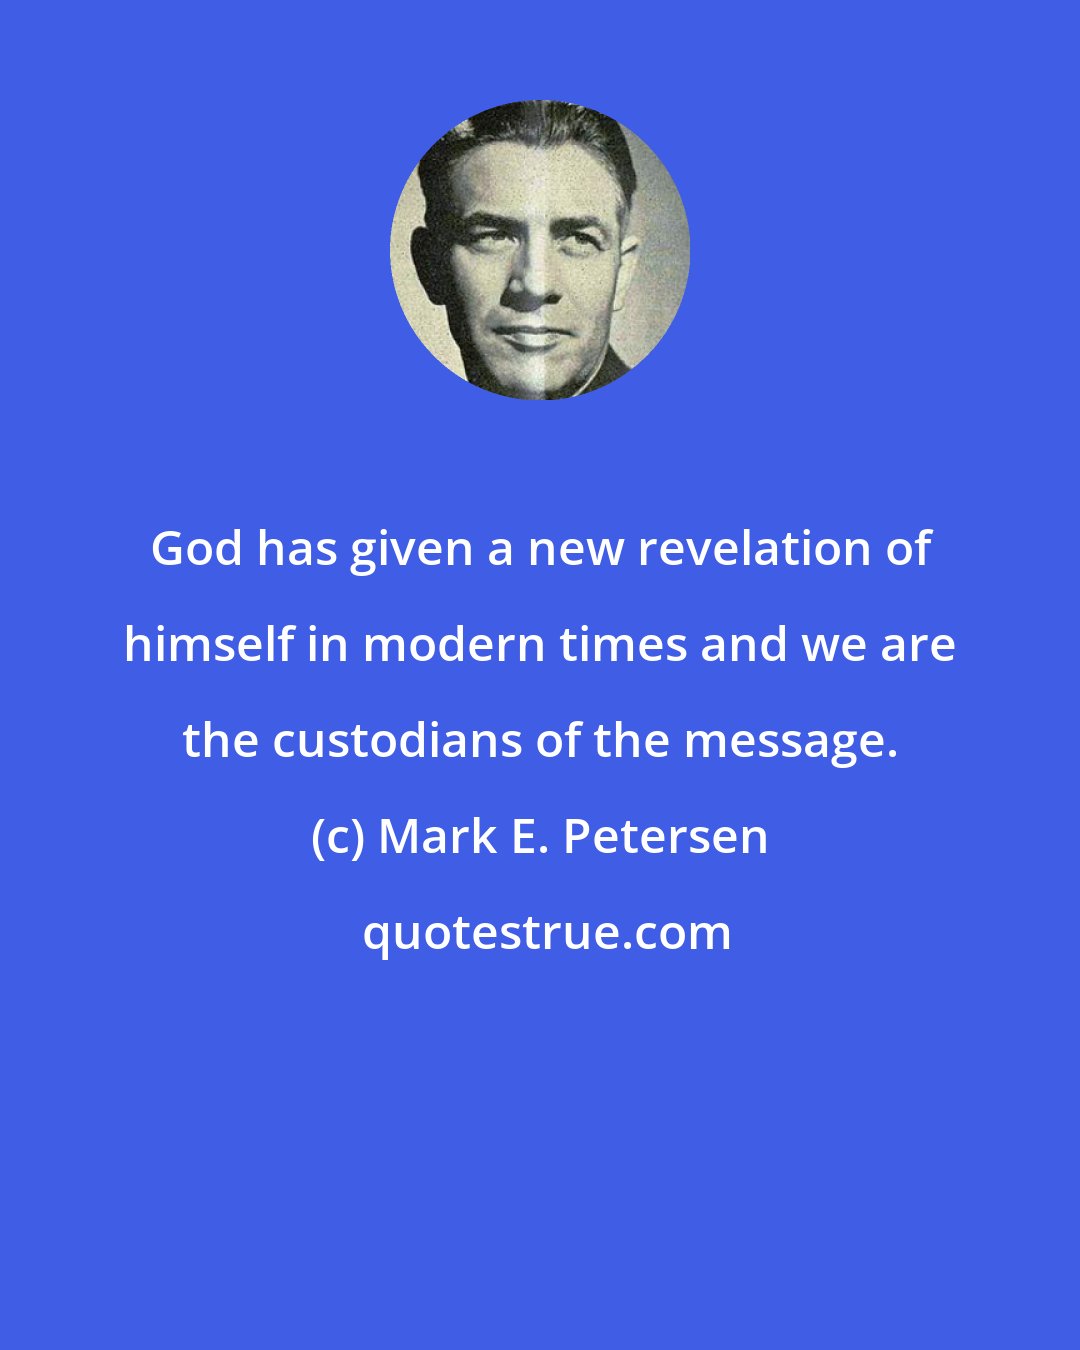 Mark E. Petersen: God has given a new revelation of himself in modern times and we are the custodians of the message.